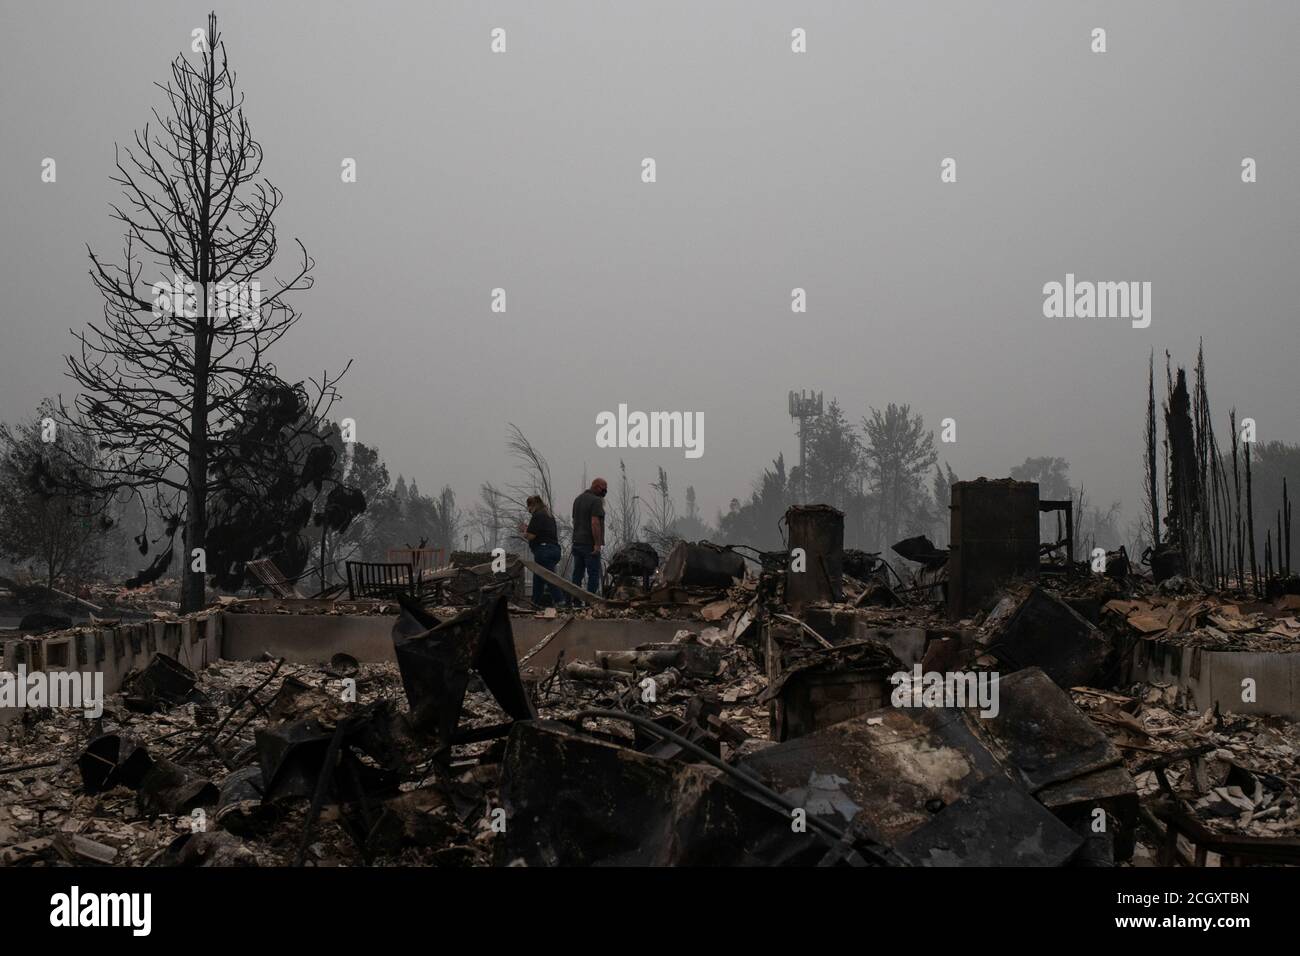 Tracy Koa and her partner David Tanksley survey the remains of their home gutted by the Almeda fire in Talent, Oregon, U.S., September 12, 2020. REUTERS/Adrees Latif Stock Photo